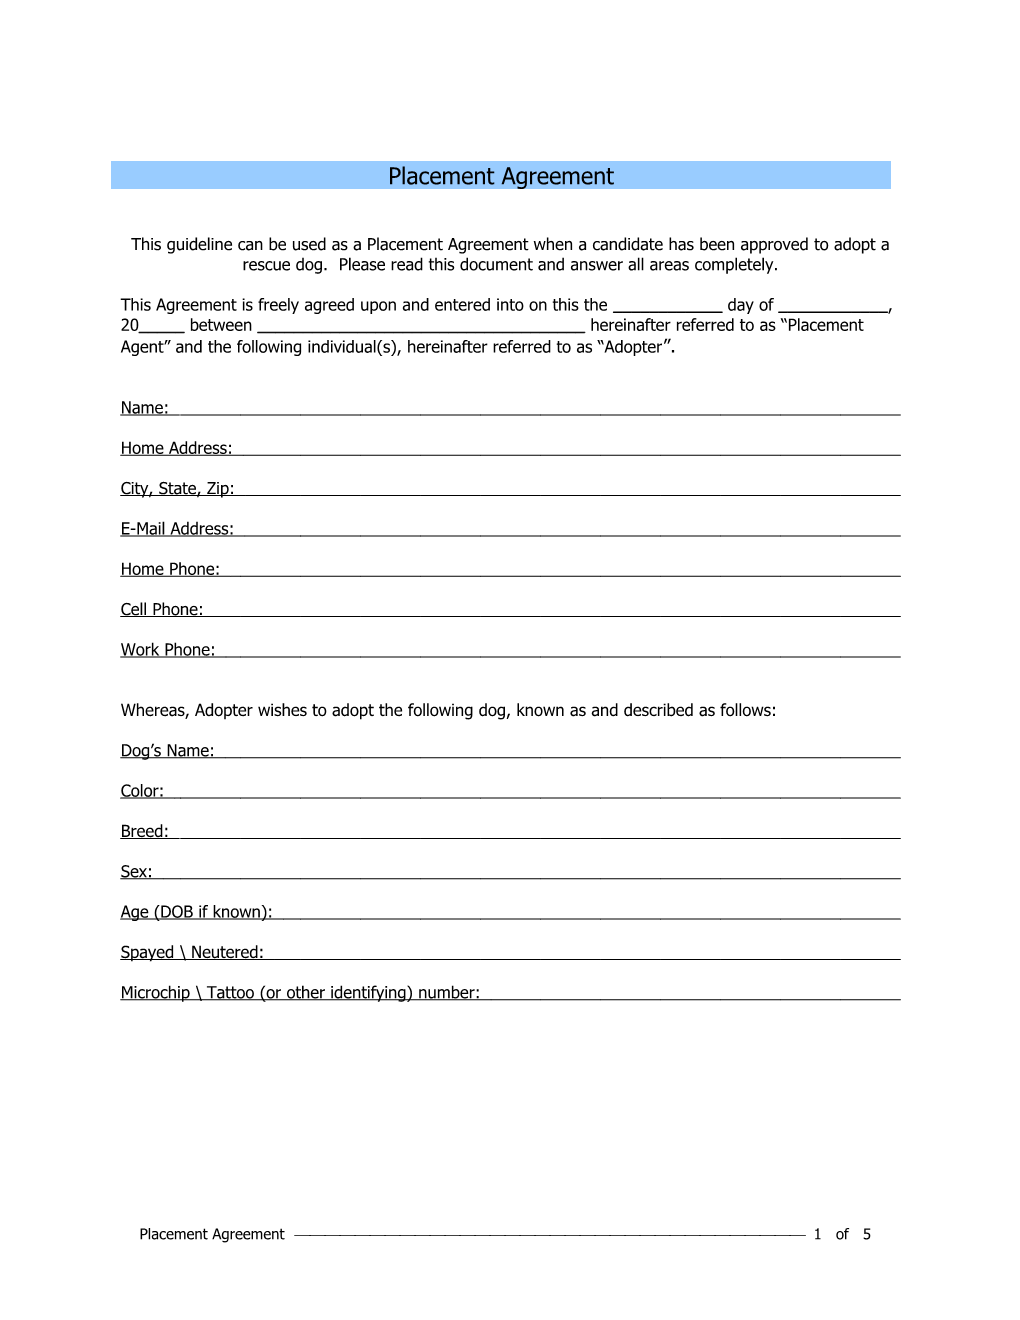 This Guideline Can Be Used As a Placement Agreement When a Candidate Has Been Approved